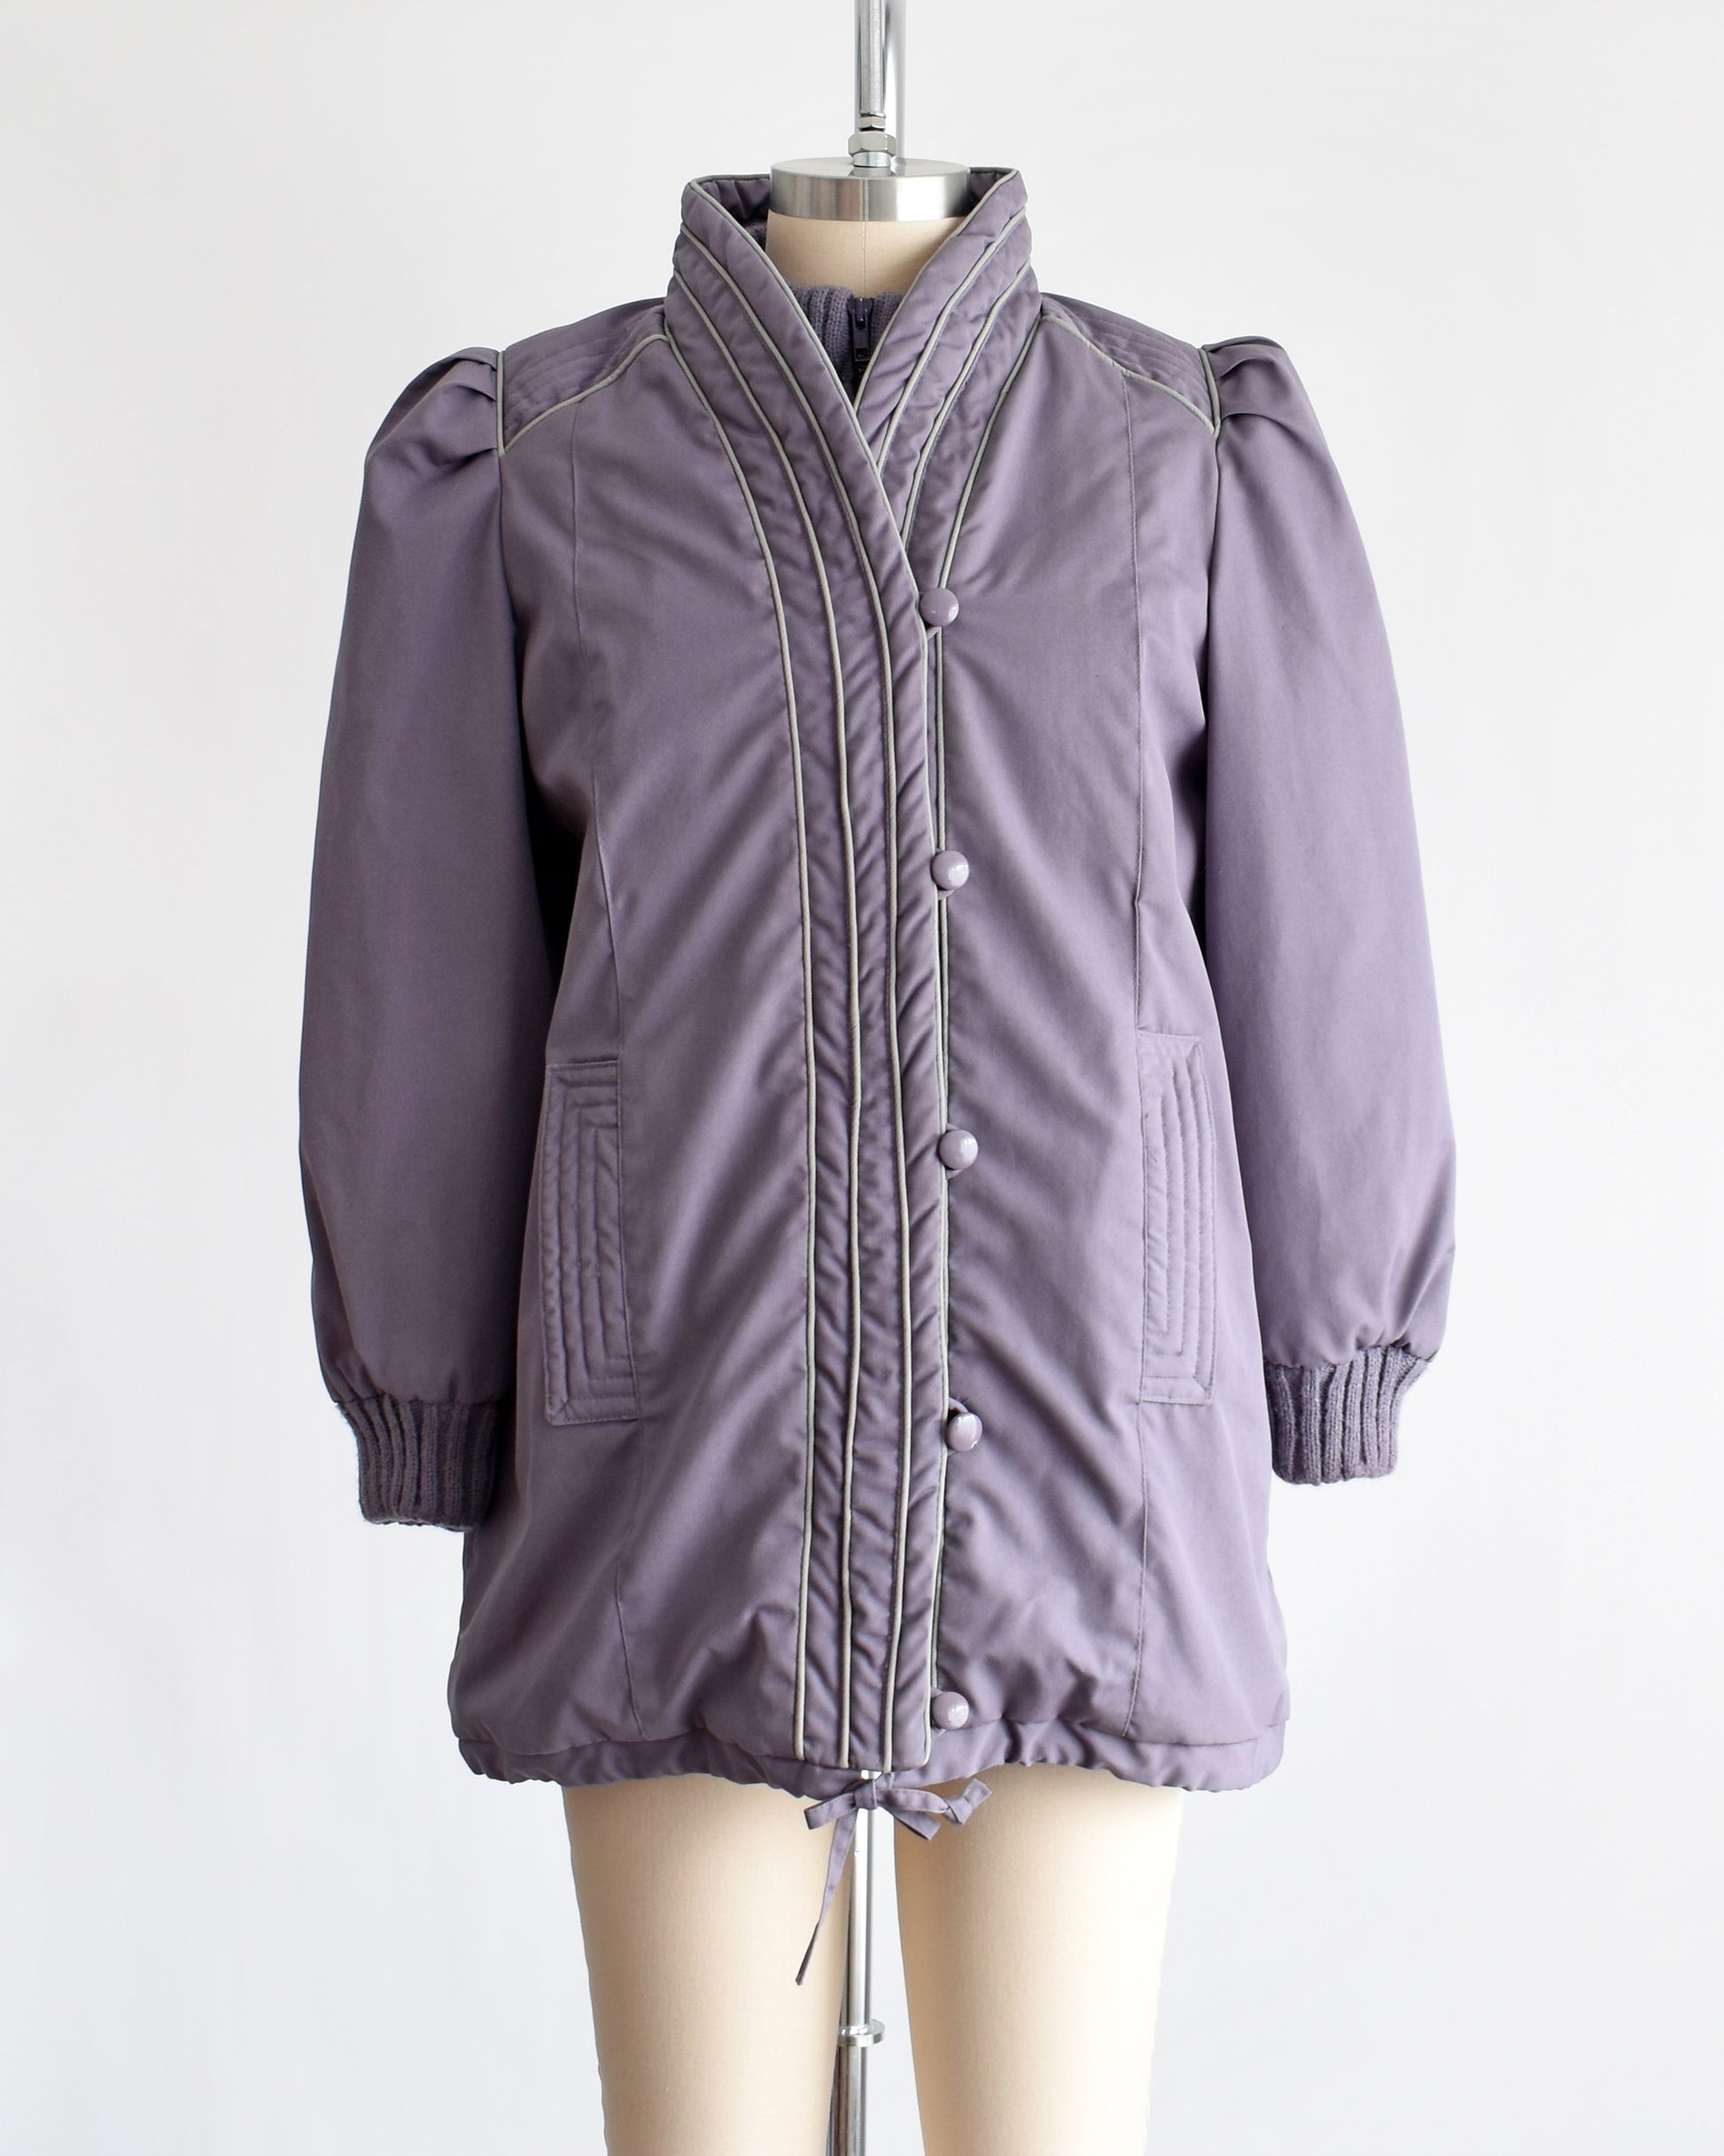 A vintage 1980s purple puffy coat with shawl style collar with gray trim